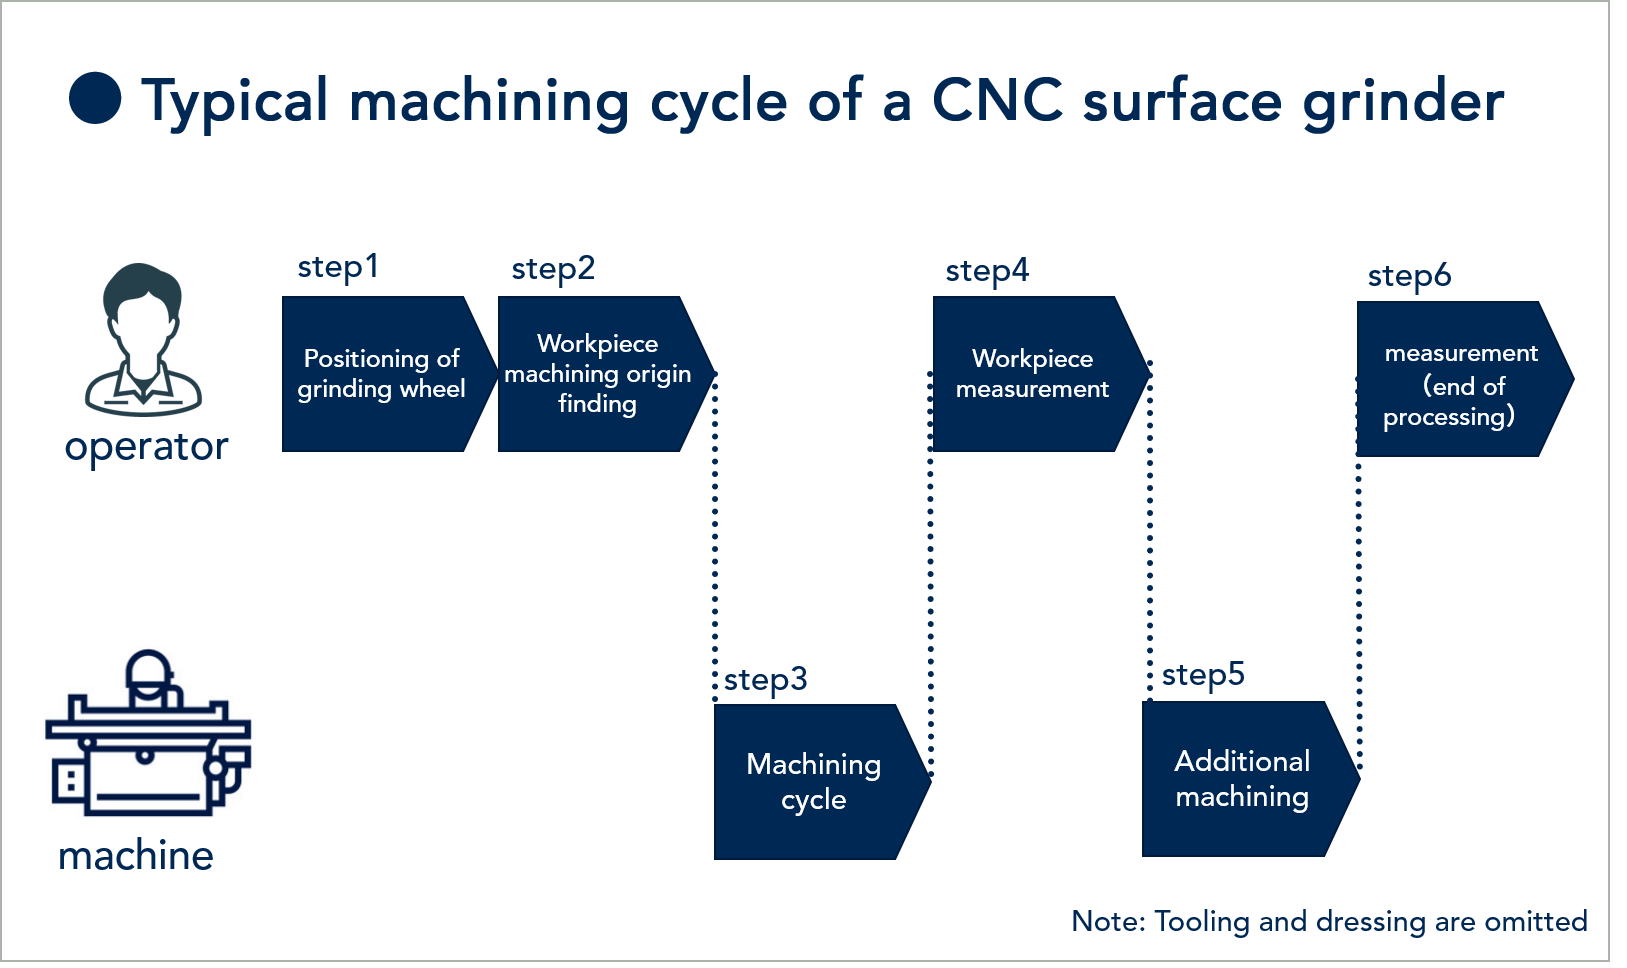 typical machining cycle of a CNC surface grinder without touch probe